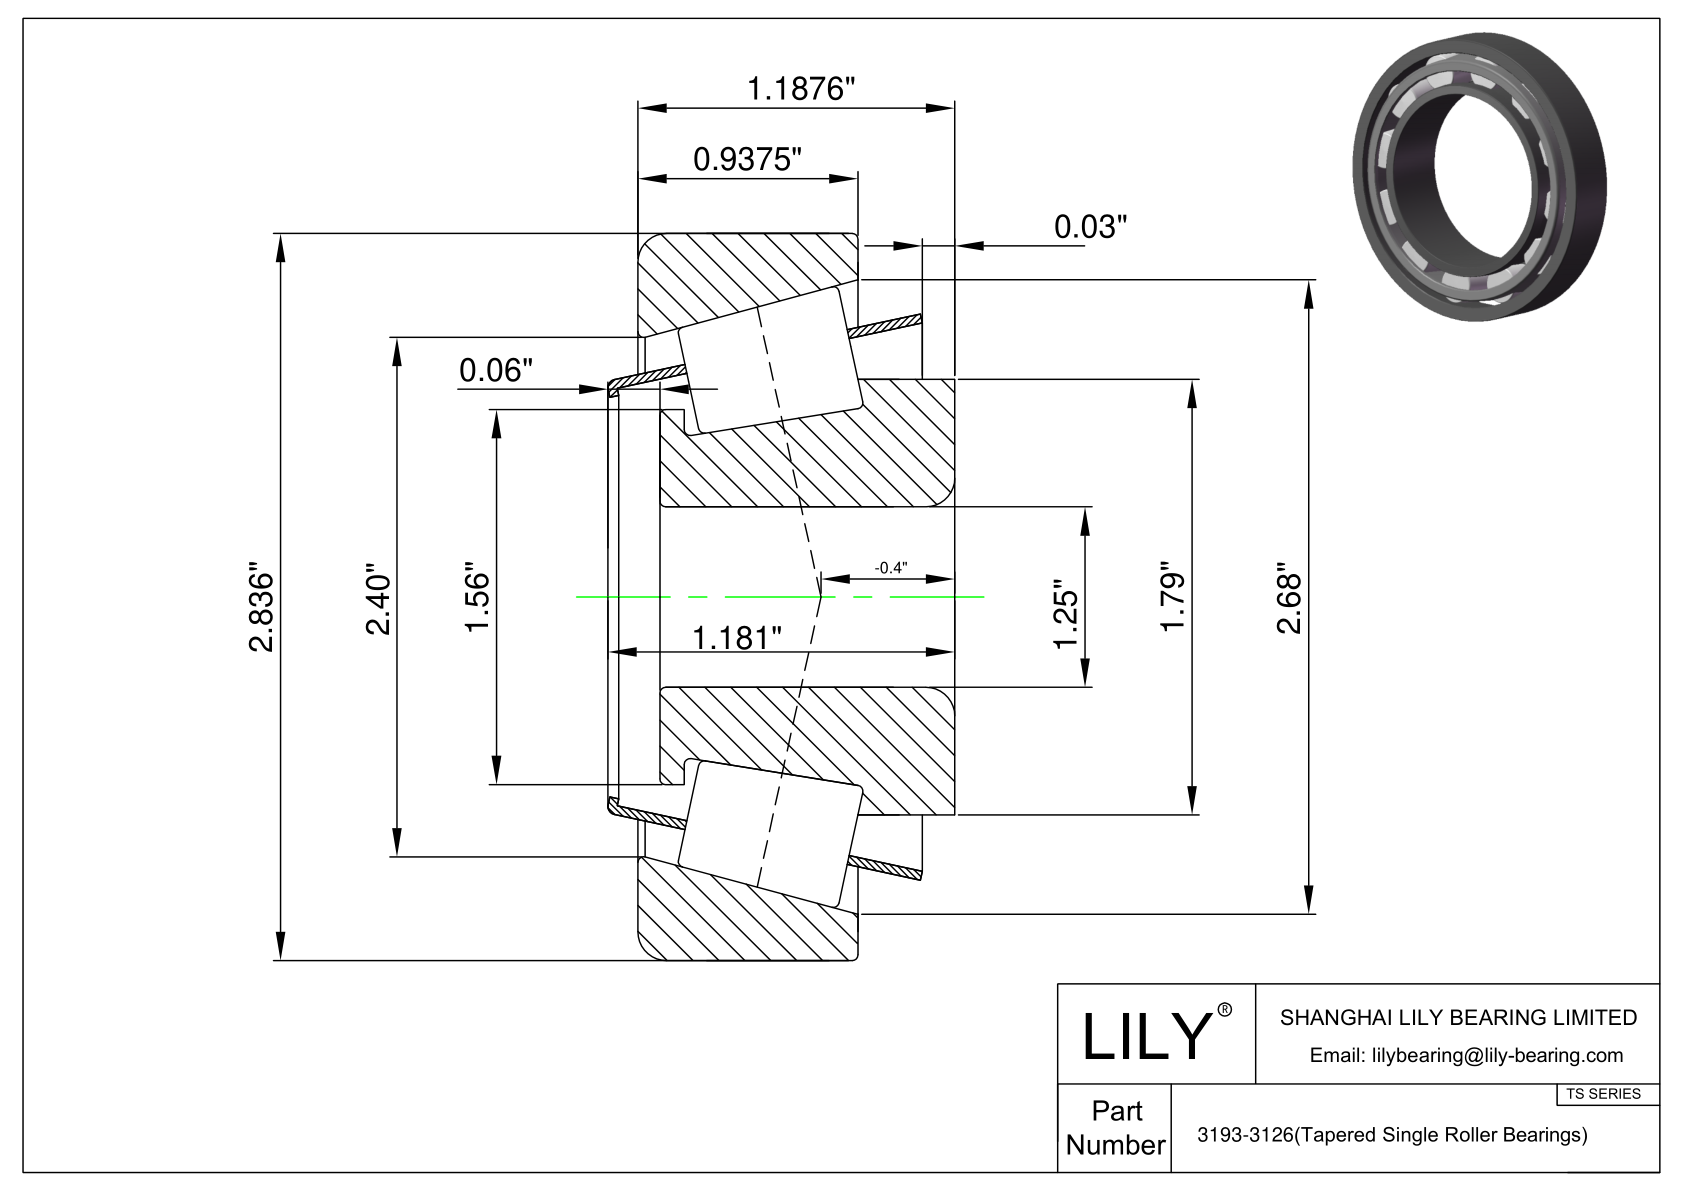 3193-3126 TS (Tapered Single Roller Bearings) (Imperial) cad drawing